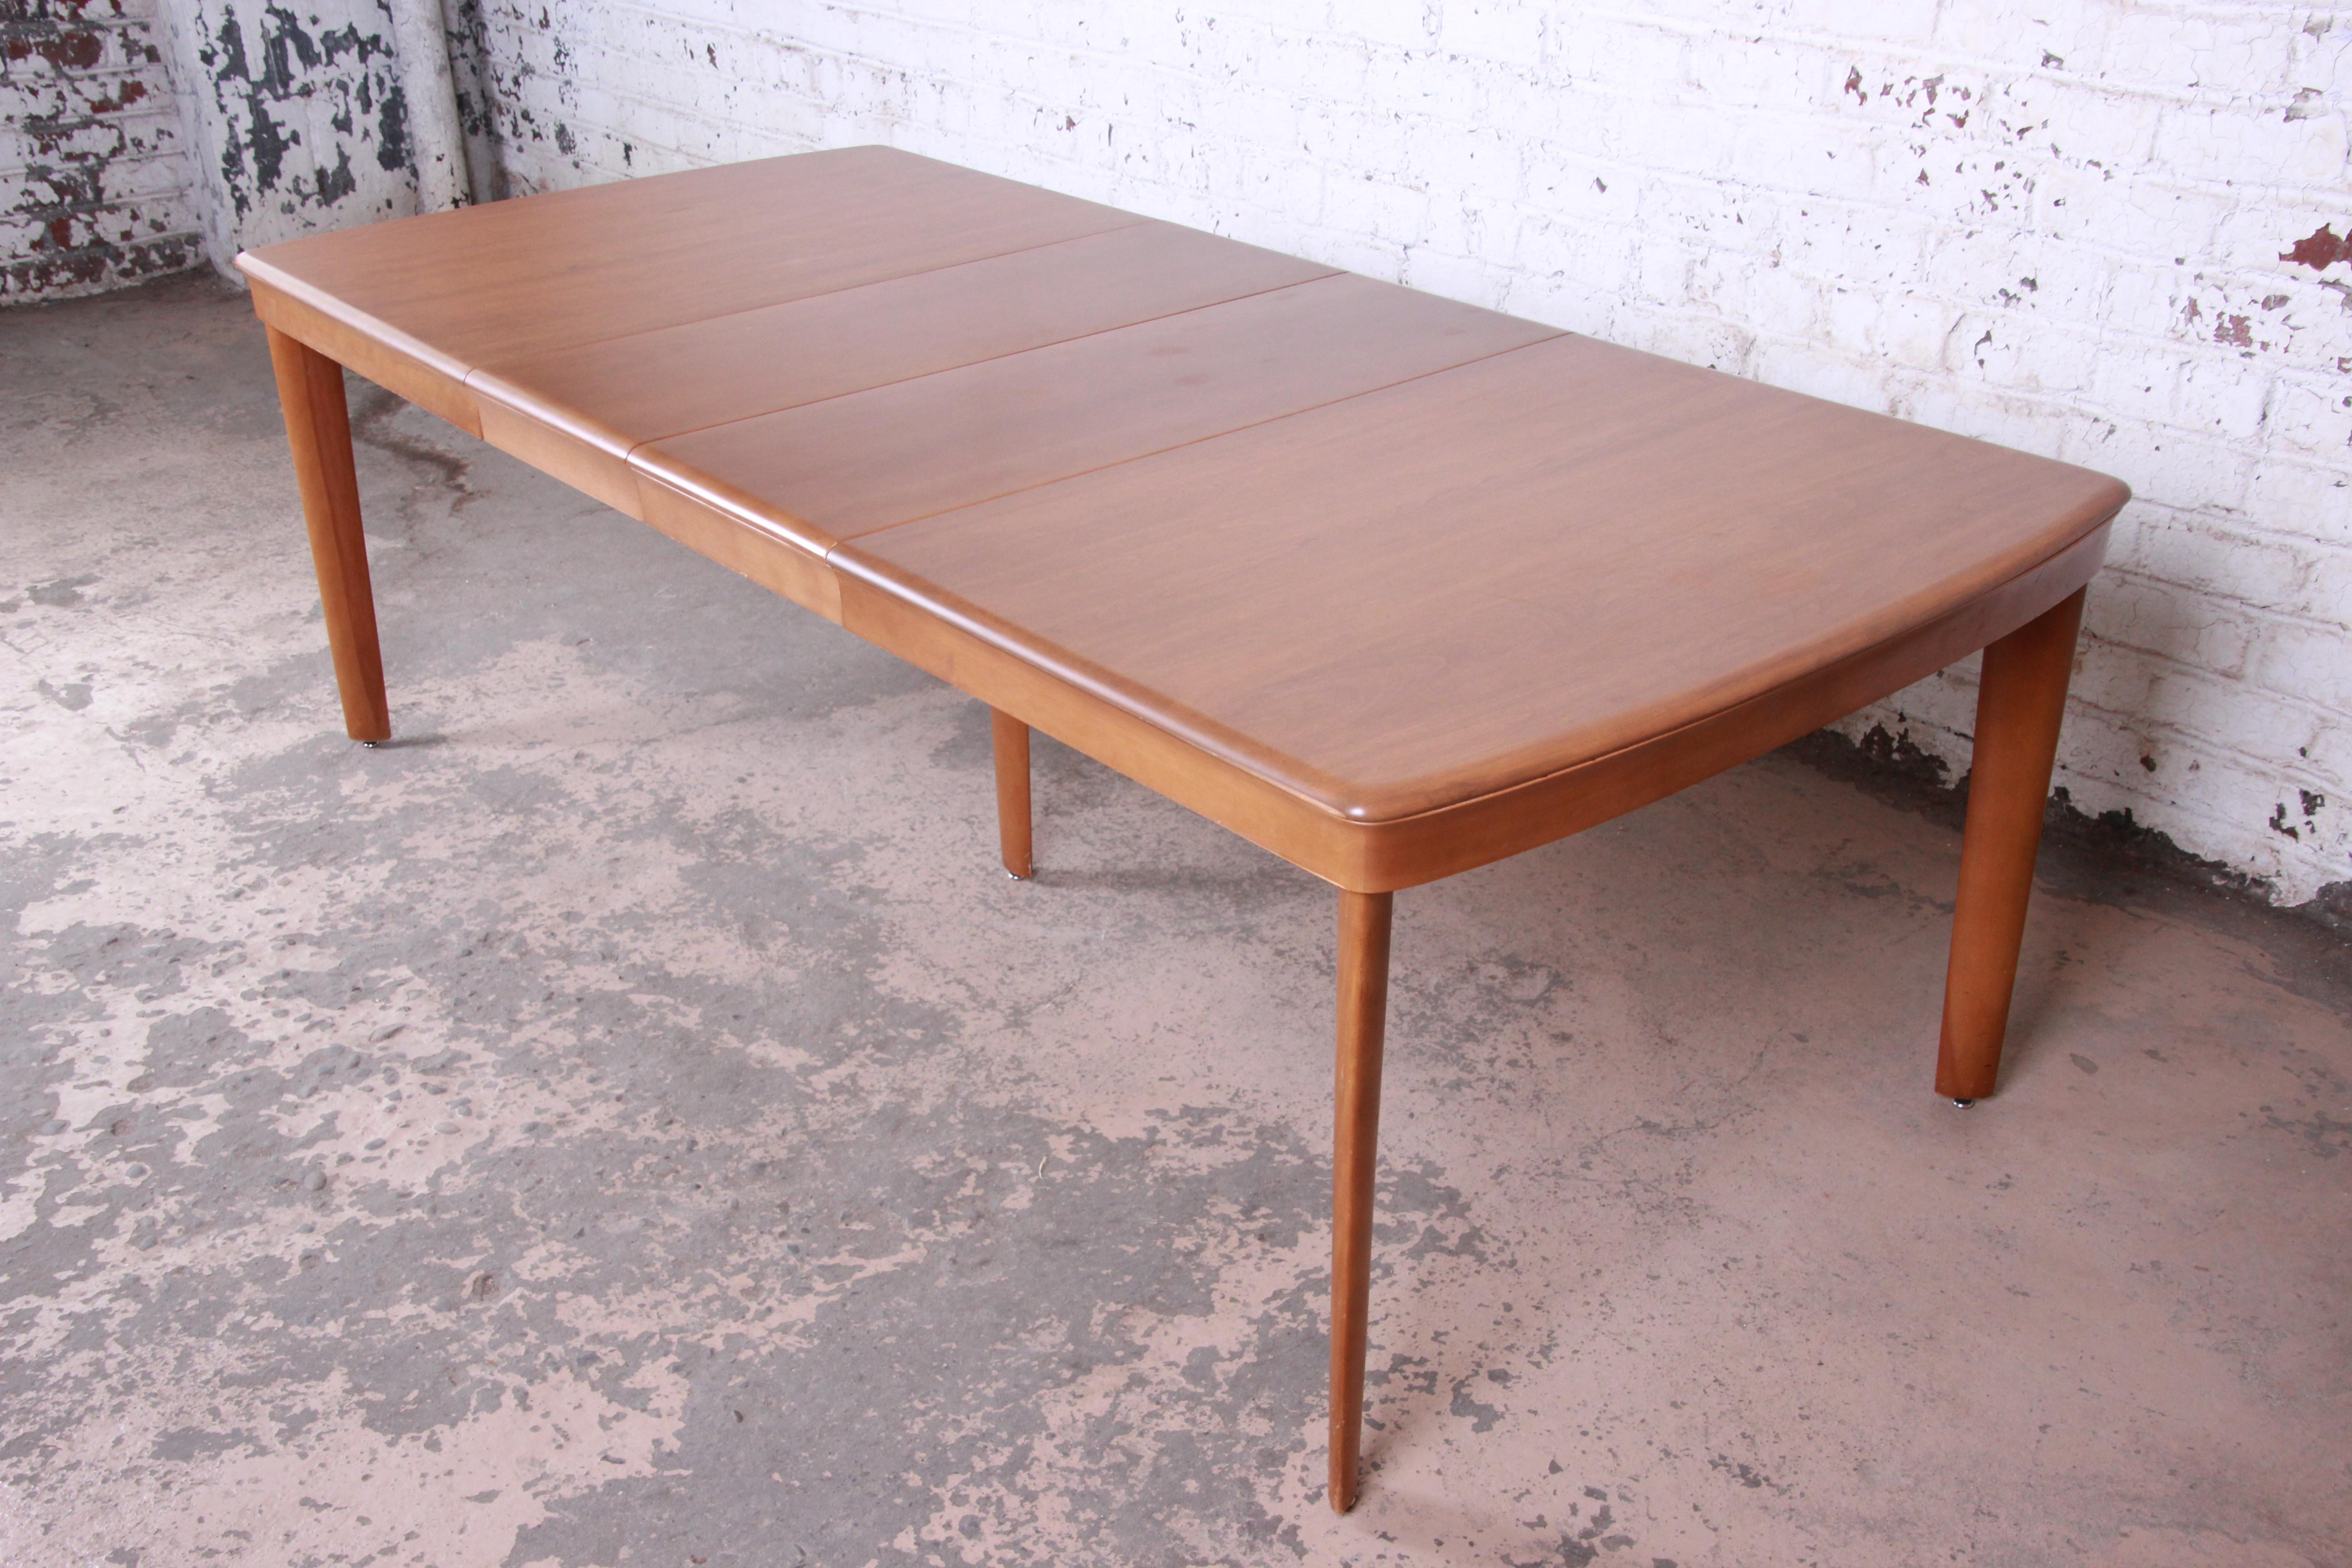 heywood wakefield table and chairs